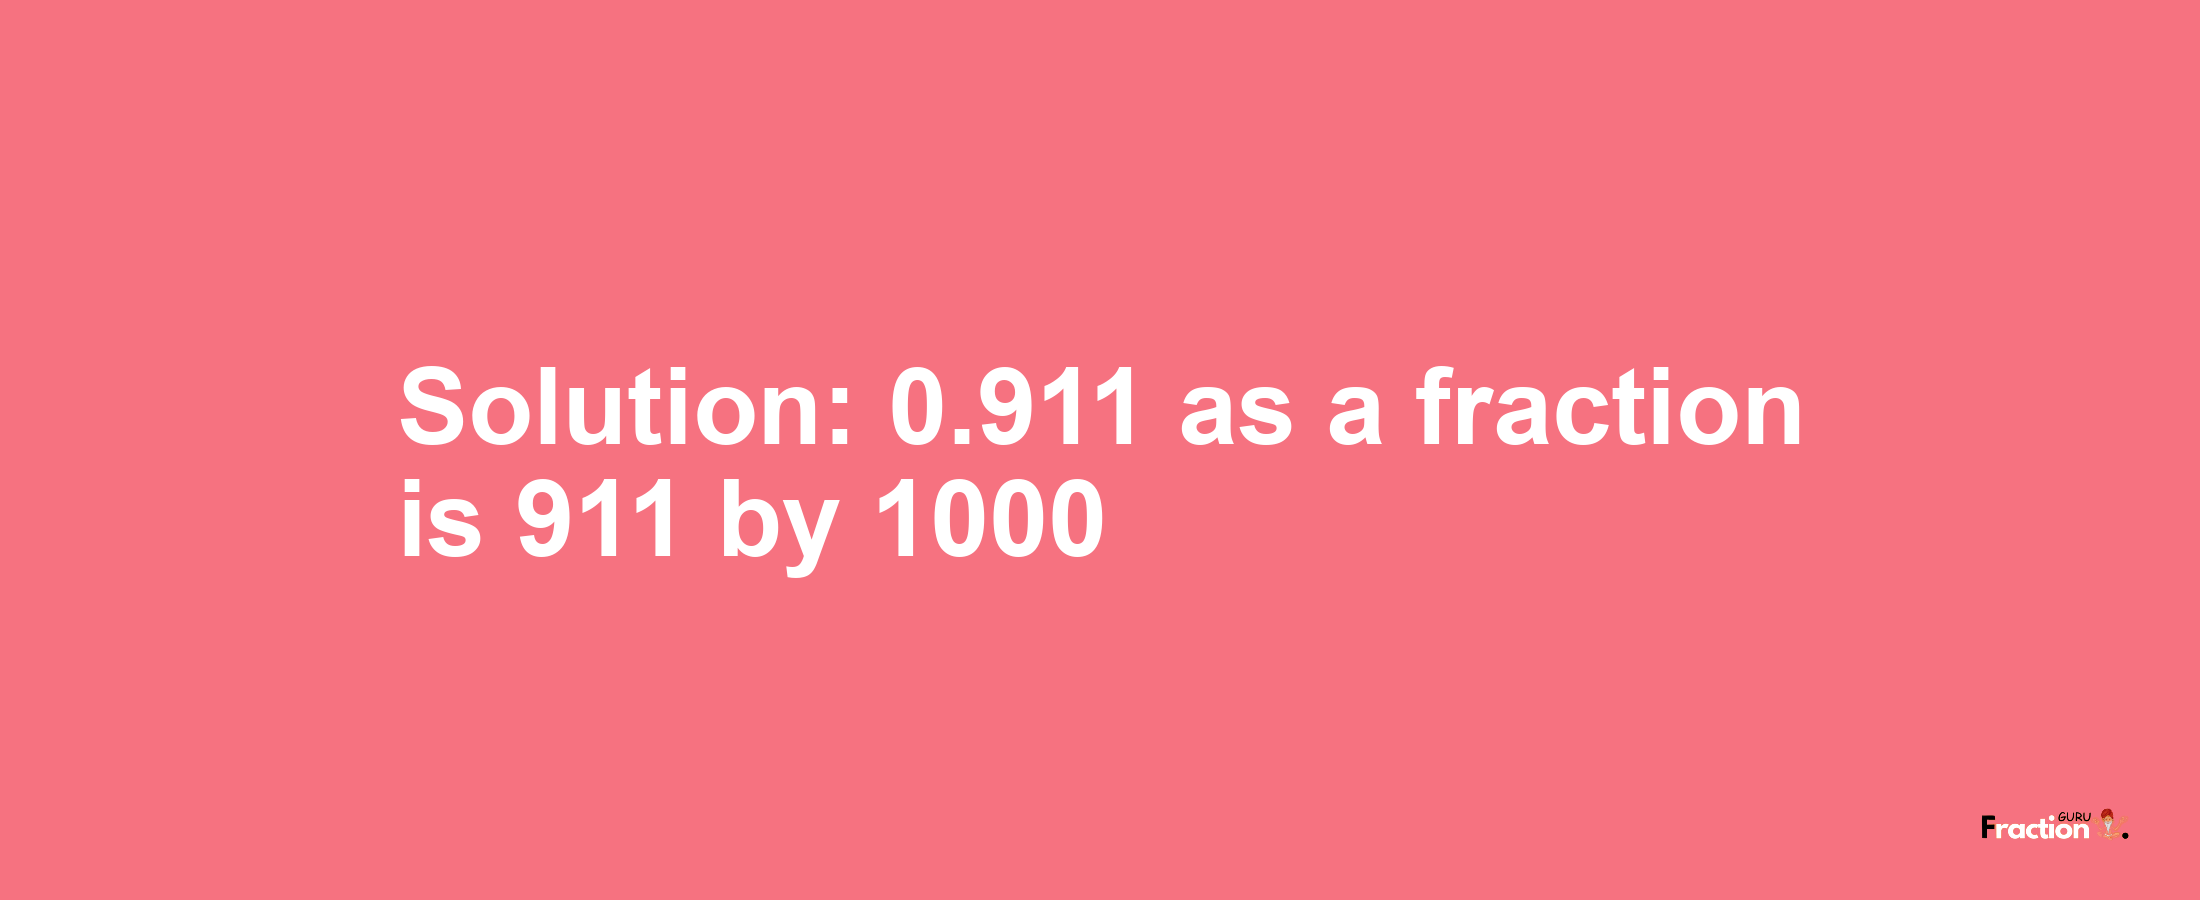 Solution:0.911 as a fraction is 911/1000